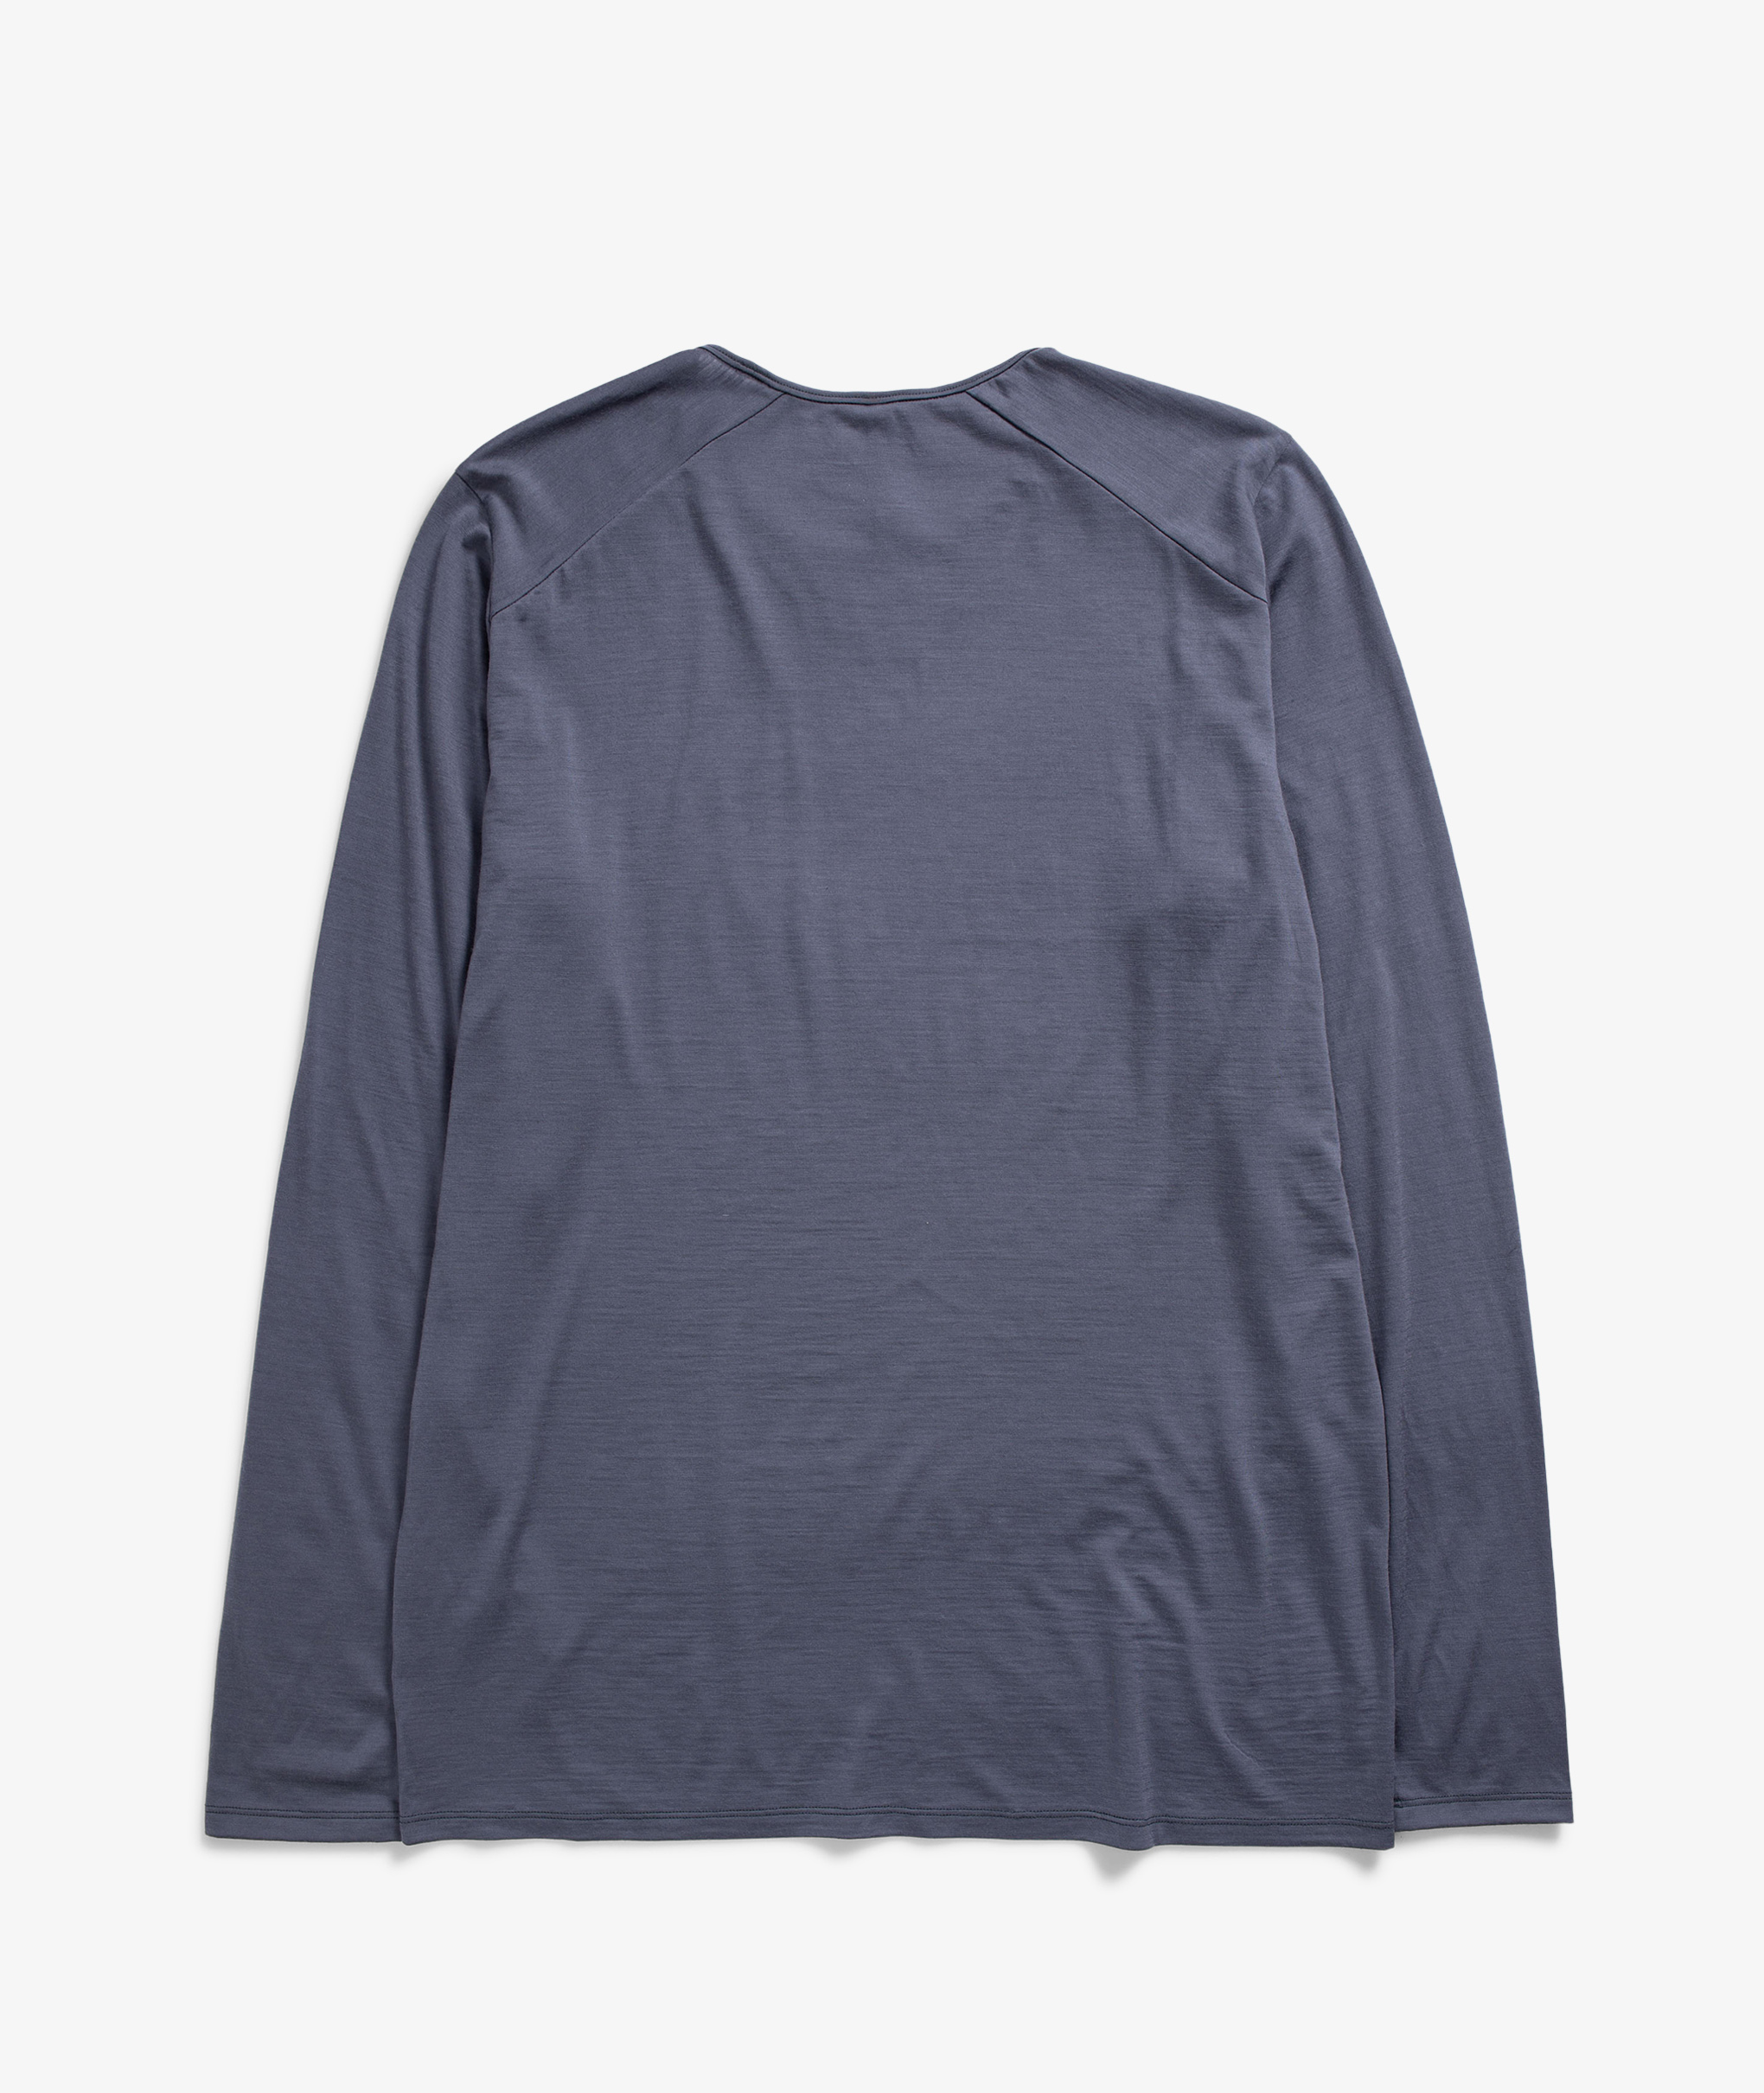 Norse Store | Shipping Worldwide - Veilance Frame LS Shirt - Overcast